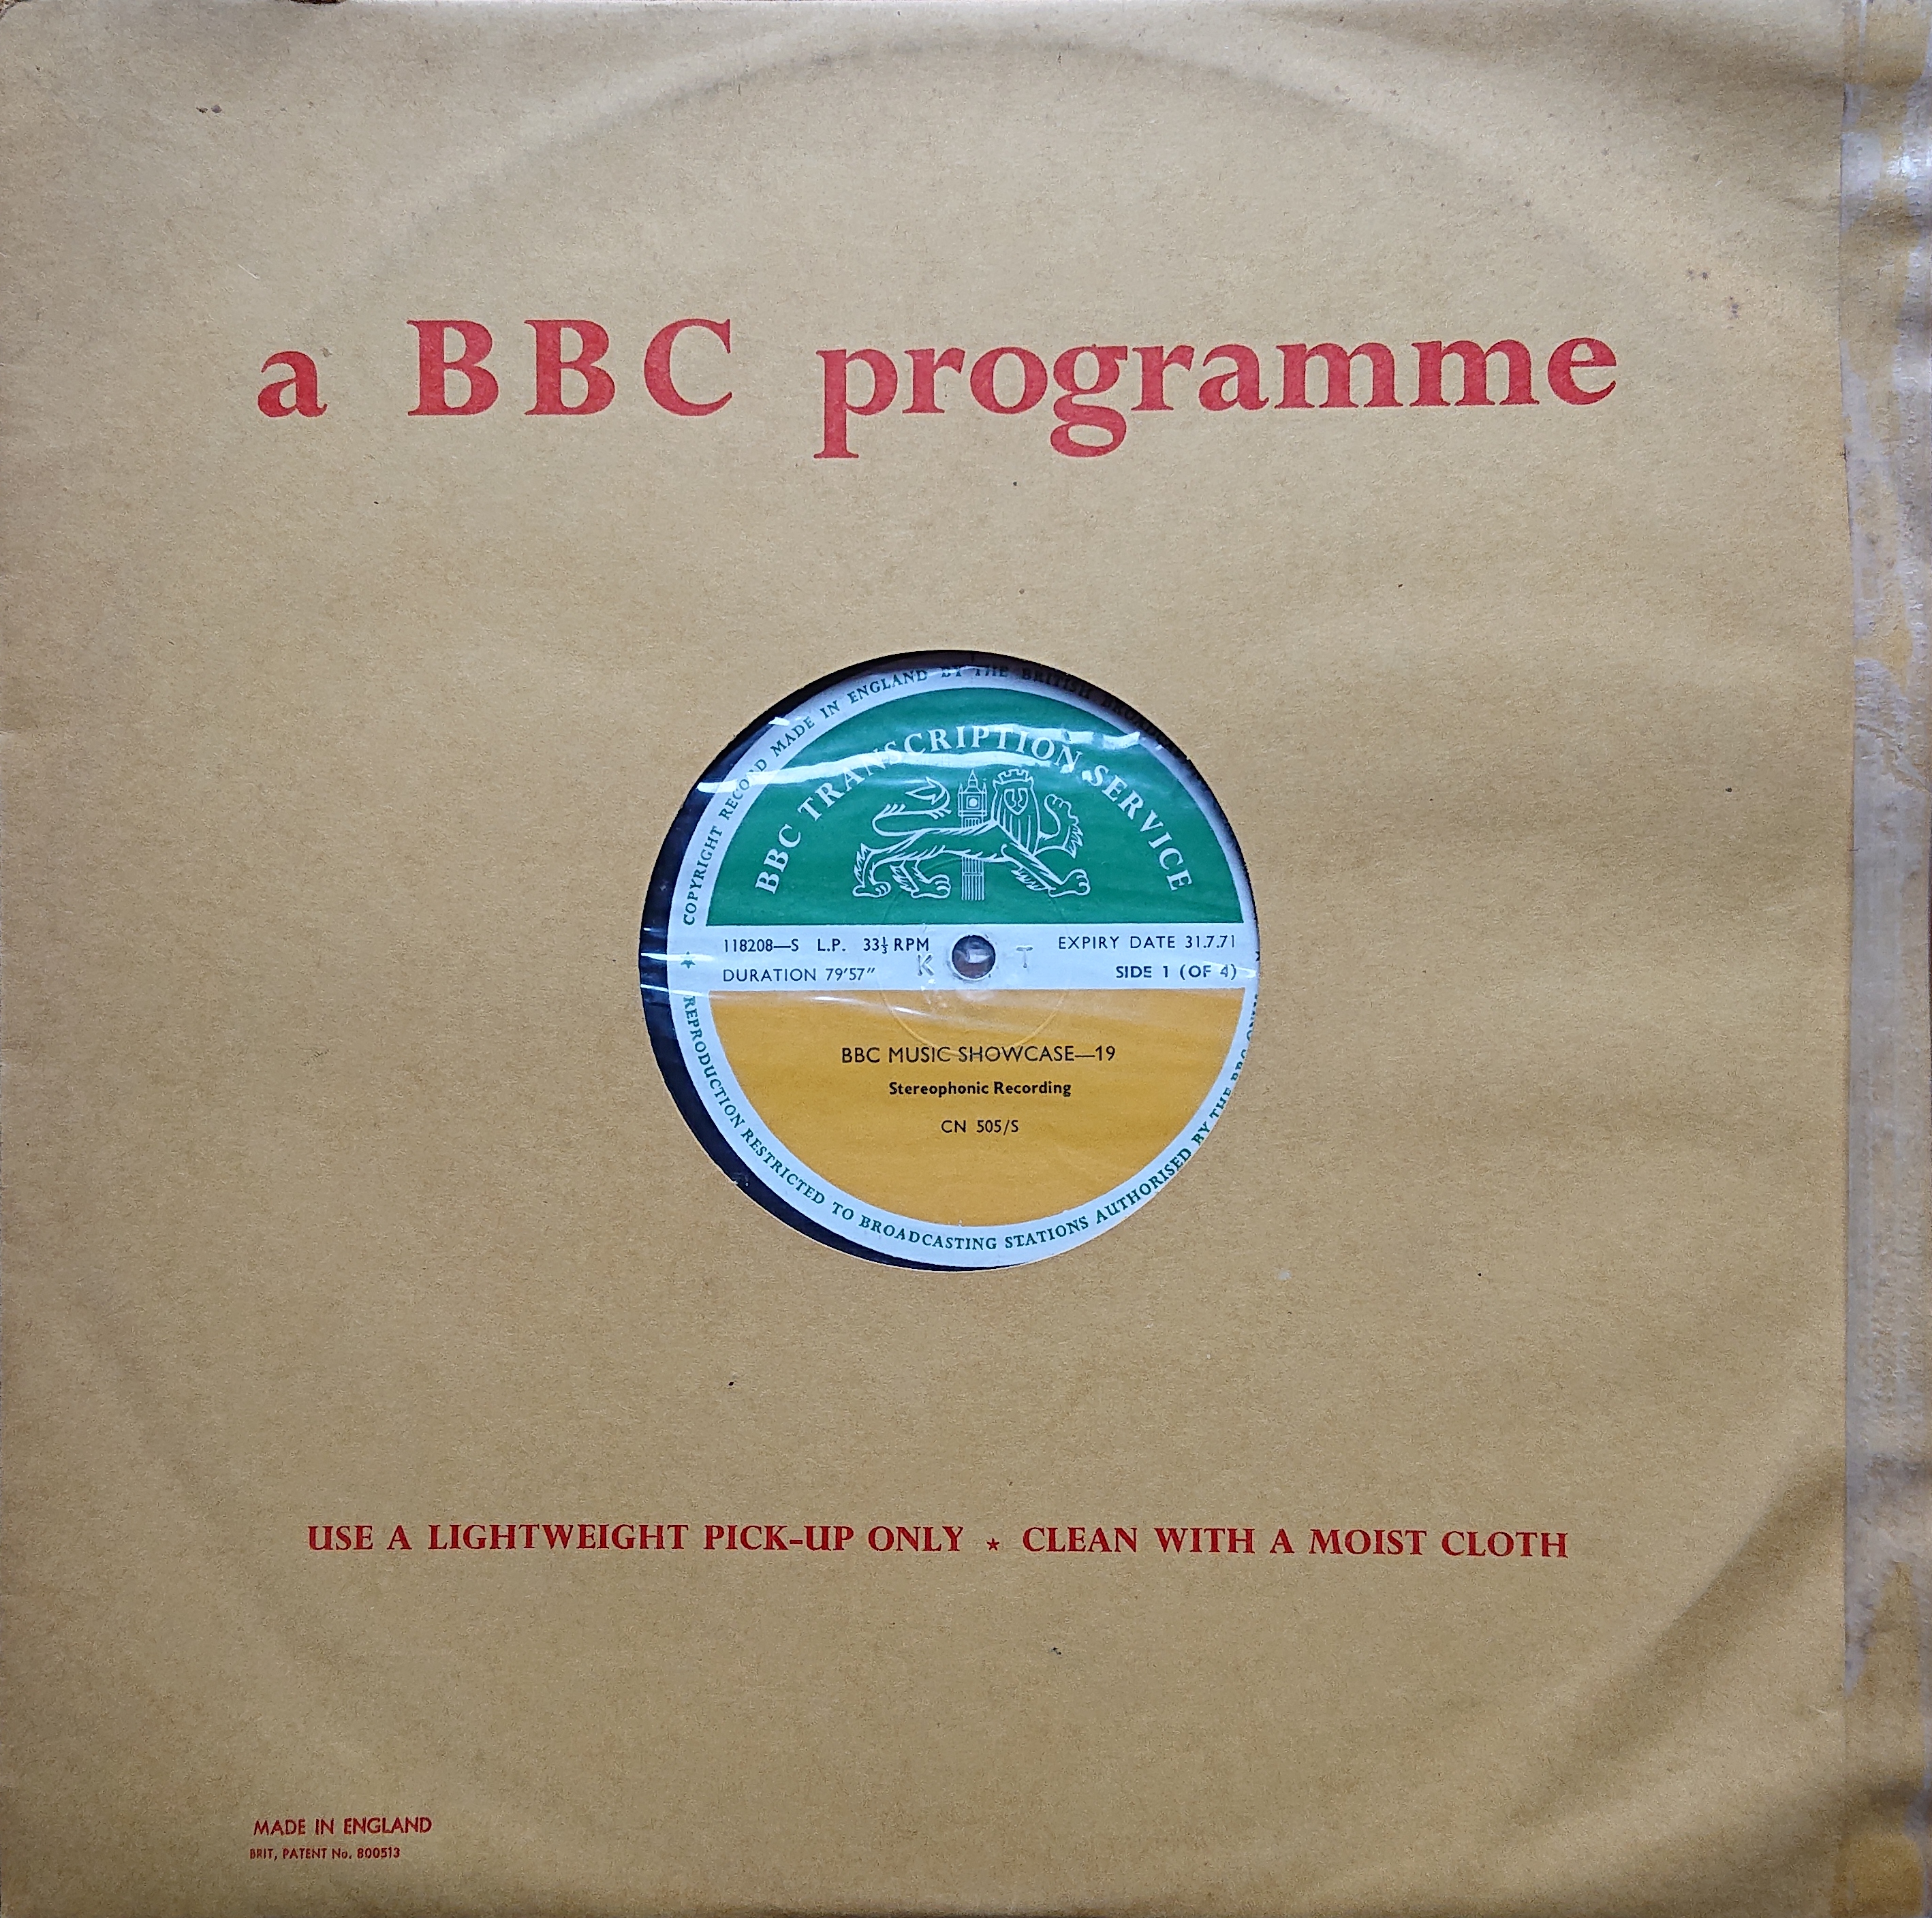 Picture of CN 505 S 37 BBC music showcase - 19 (Sides 1 & 3) by artist Various from the BBC records and Tapes library